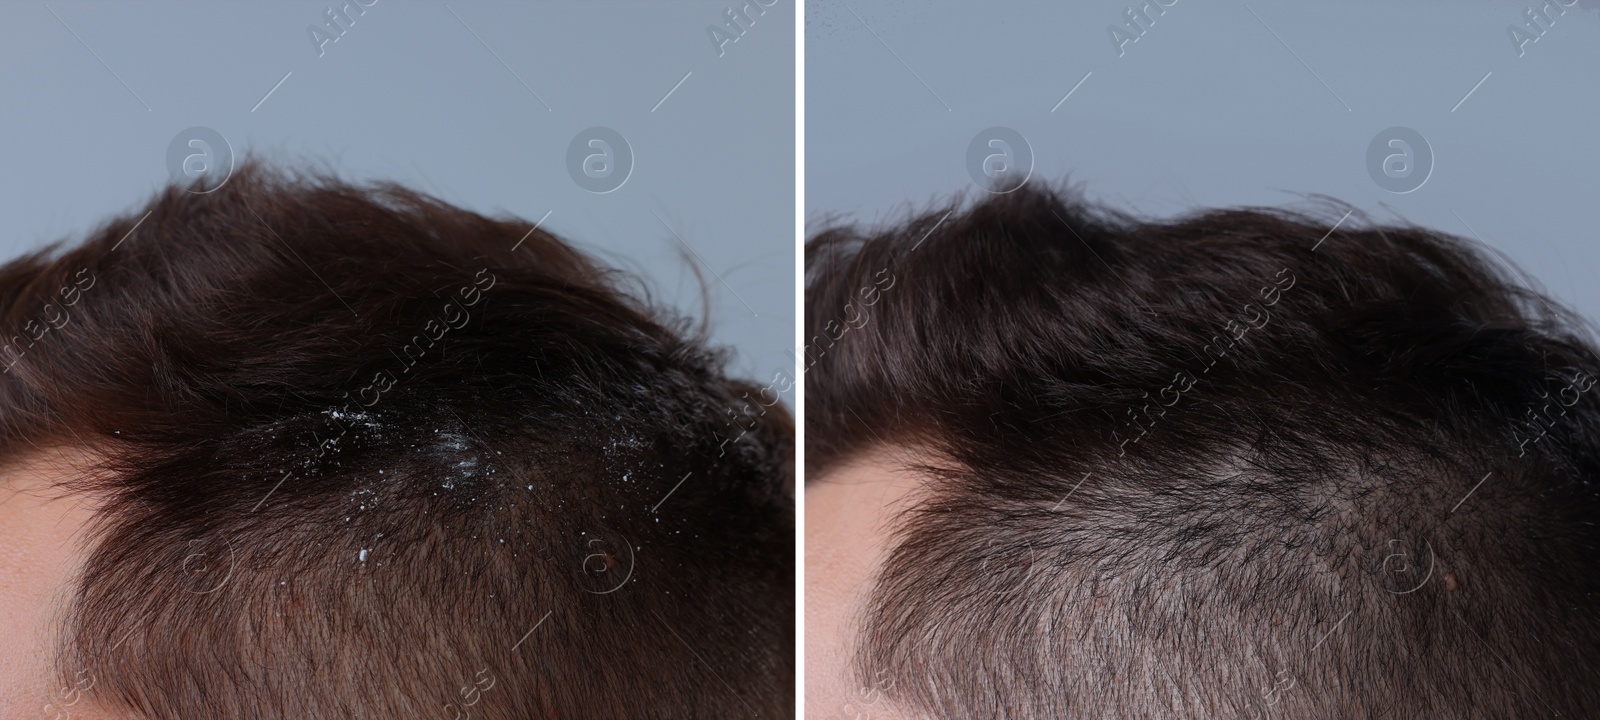 Image of Man showing hair before and after dandruff treatment on grey background, collage